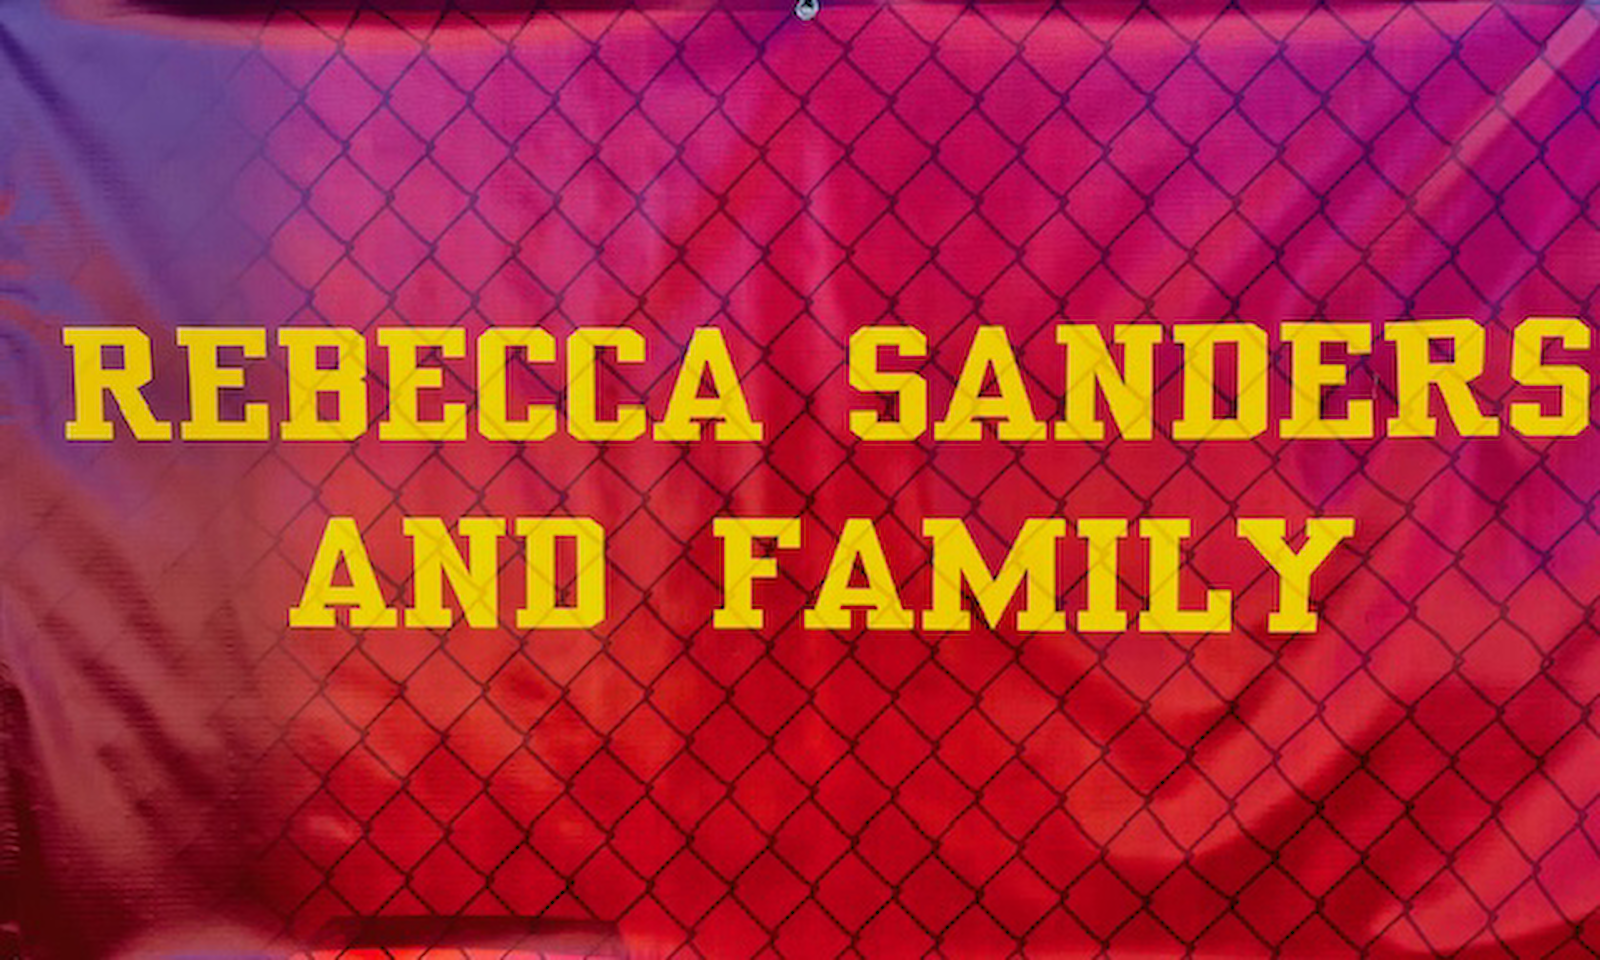 Rebecca Sanders and Family